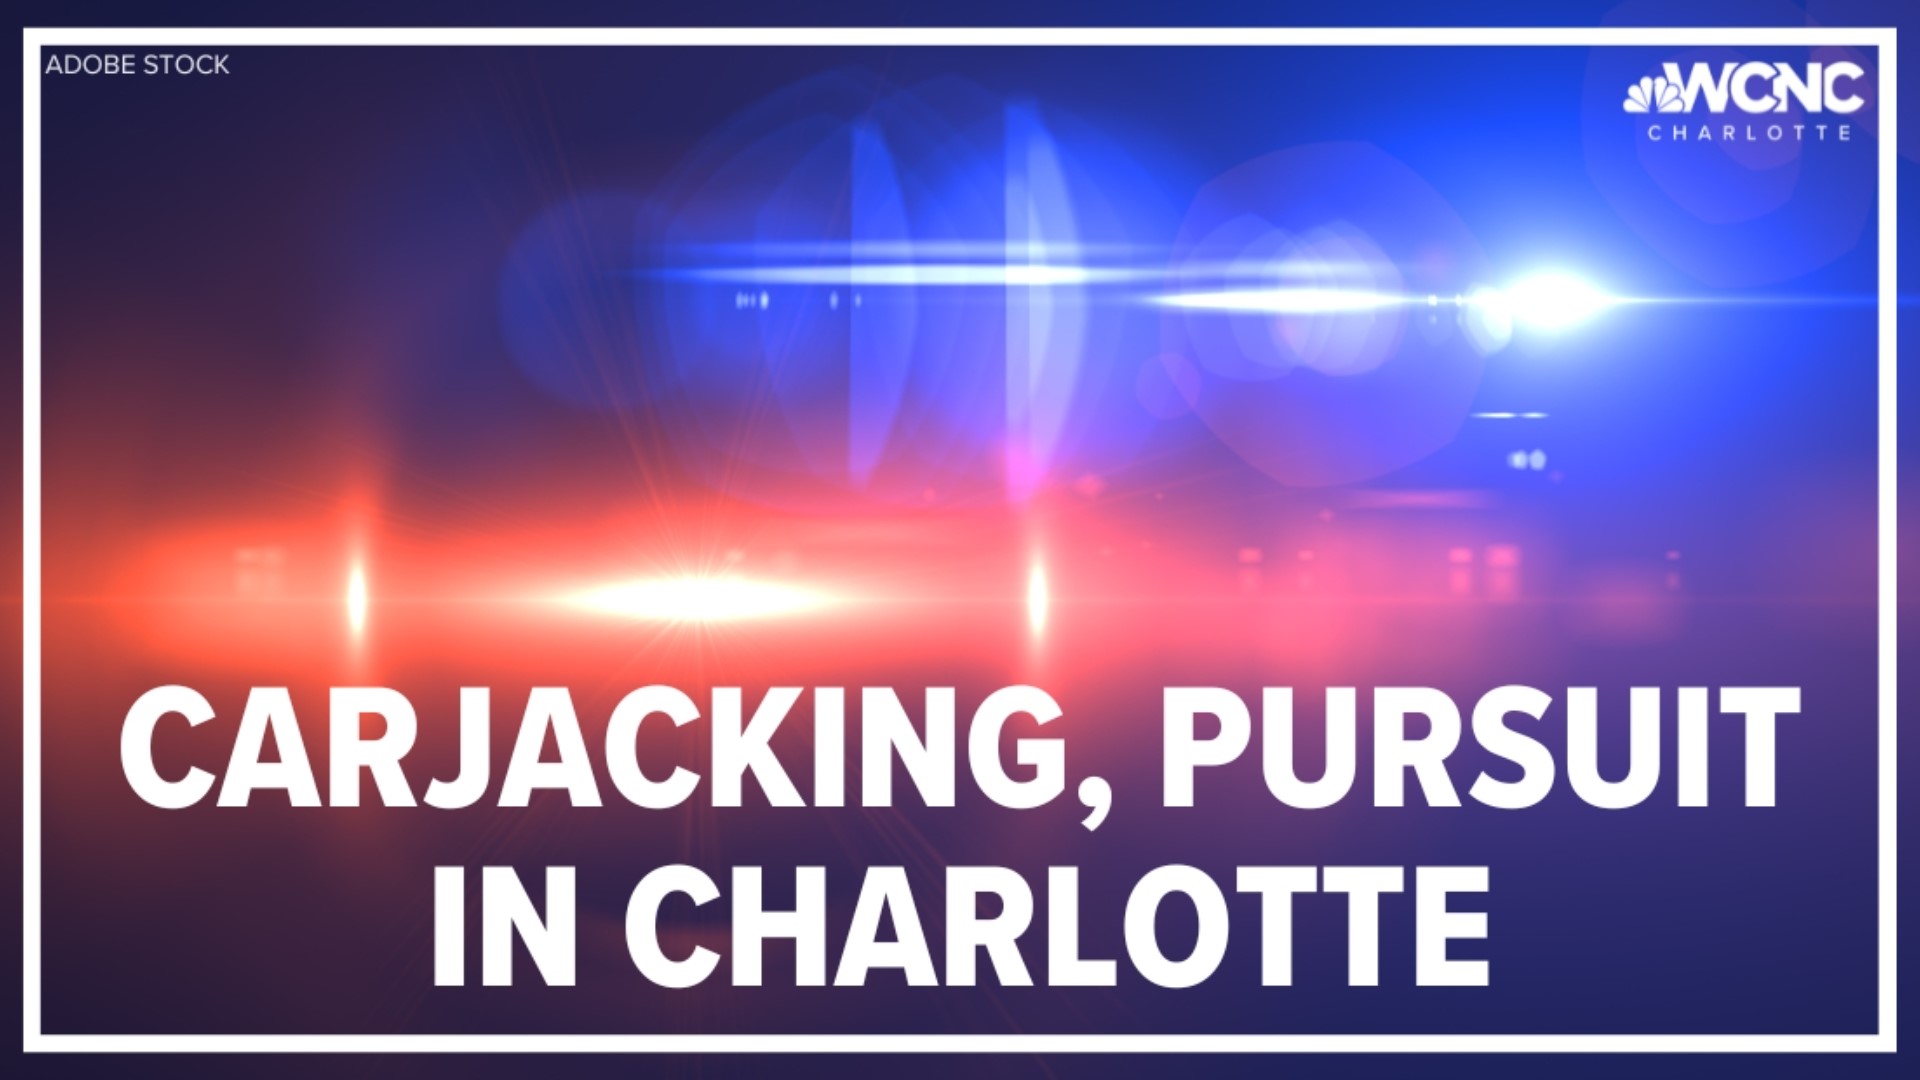 CMPD arrested a person tonight for a carjacking they said led to a police pursuit.